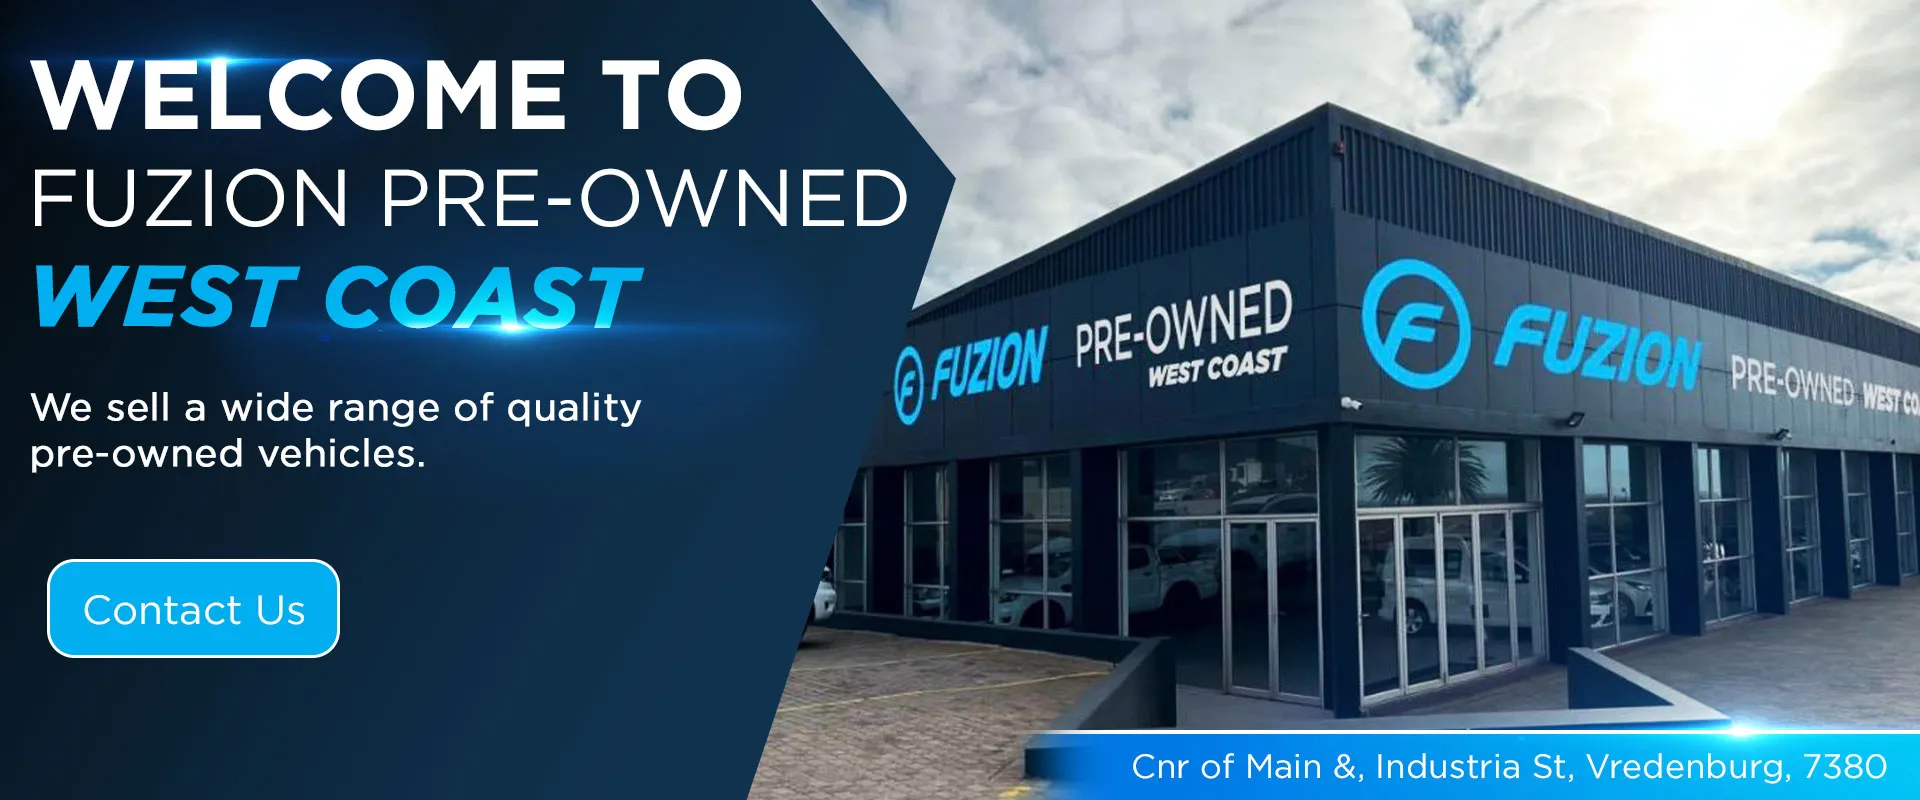 Fuzion preowned dealership